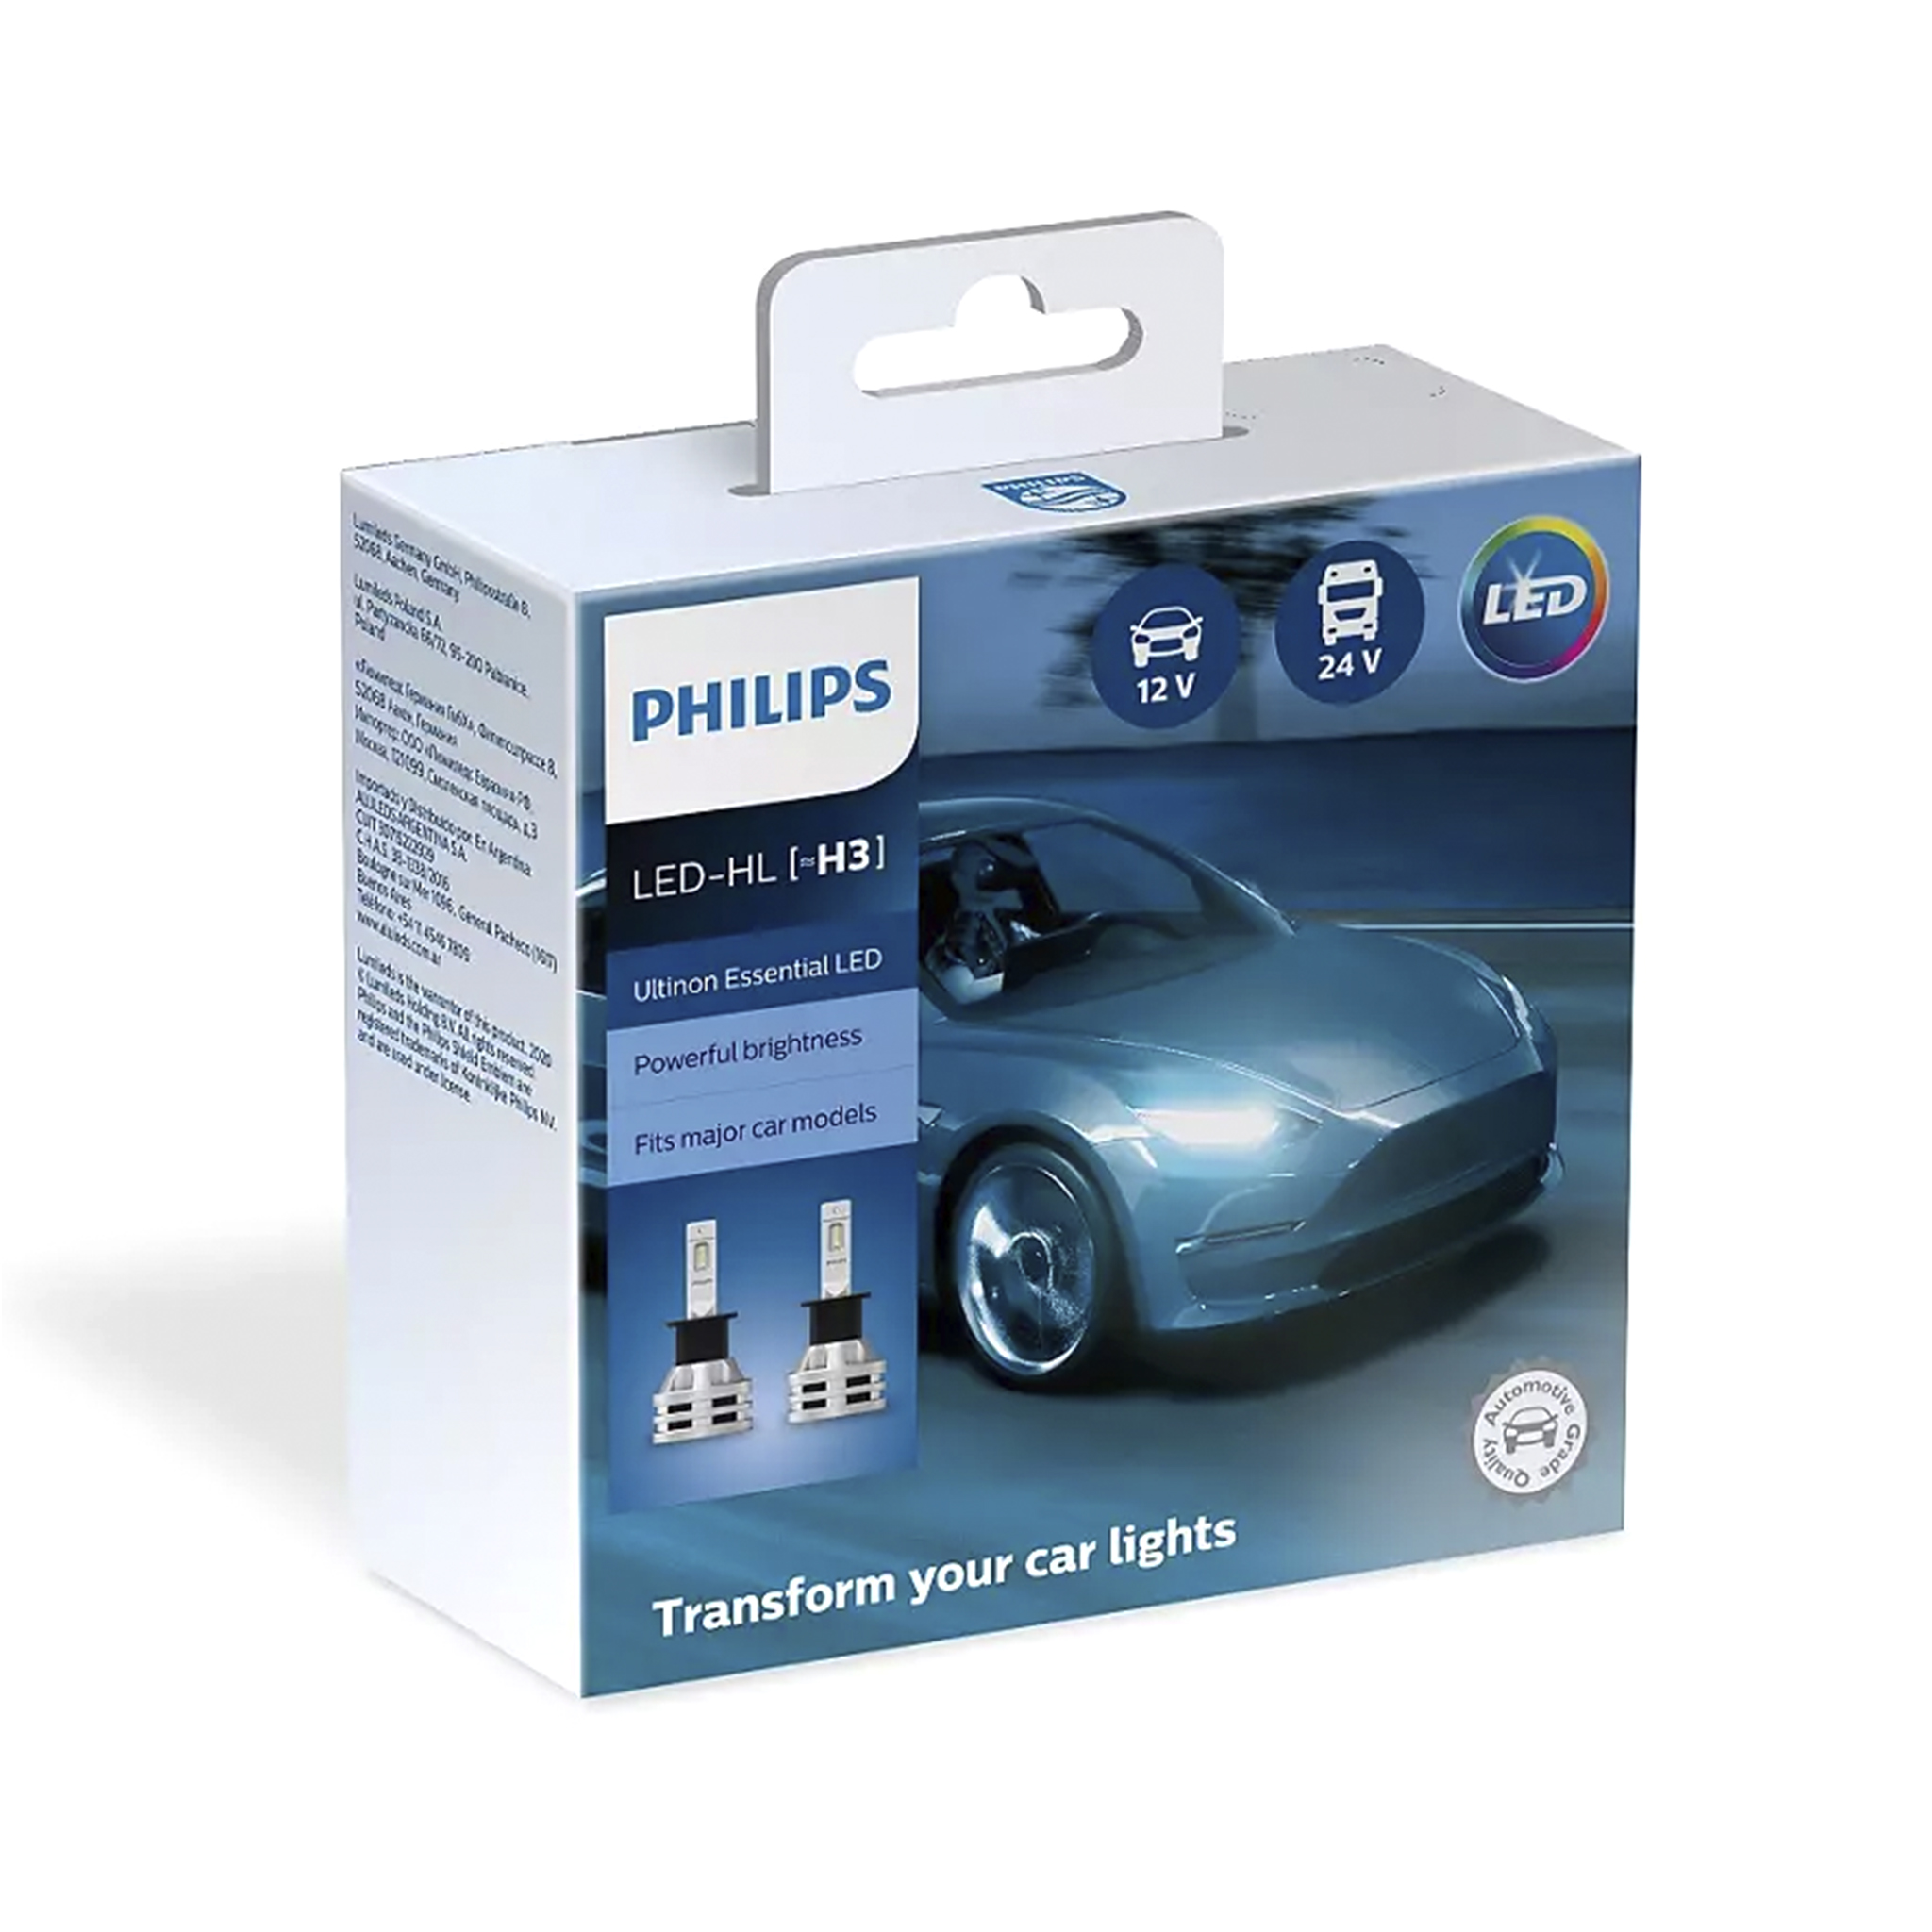 LED-pære Philips Ultinon Essential, H3